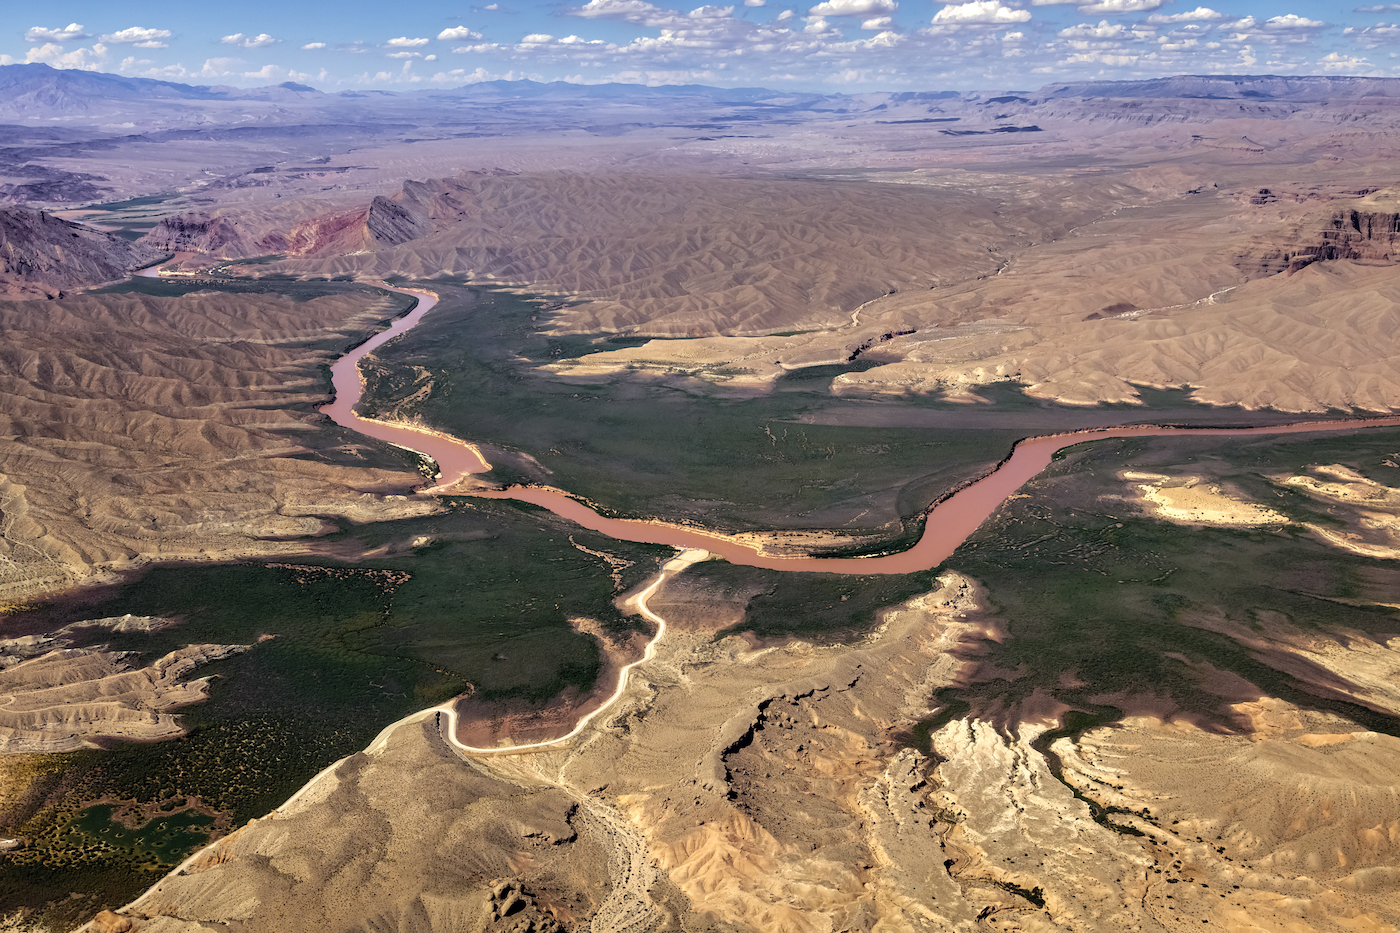 An aerial view of the twisting Colorado river, with green vegetation surrounding the banks and dry desert further away.